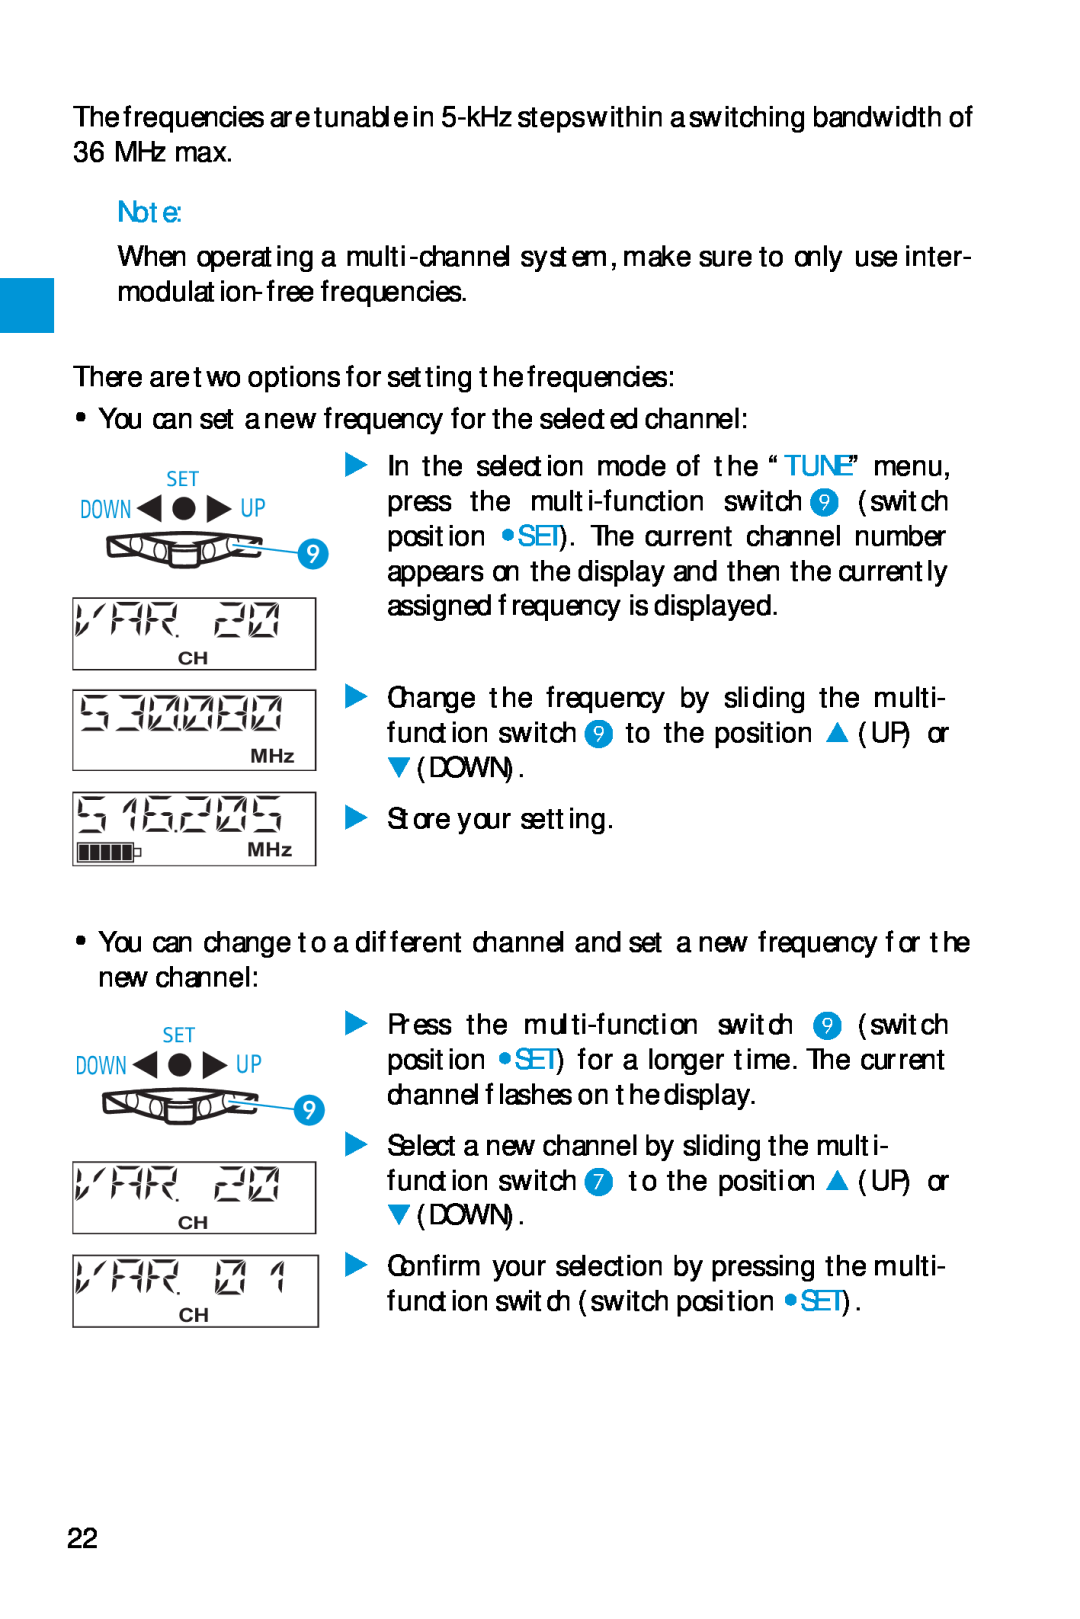 Sennheiser SK 5212 manual There are two options for setting the frequencies 